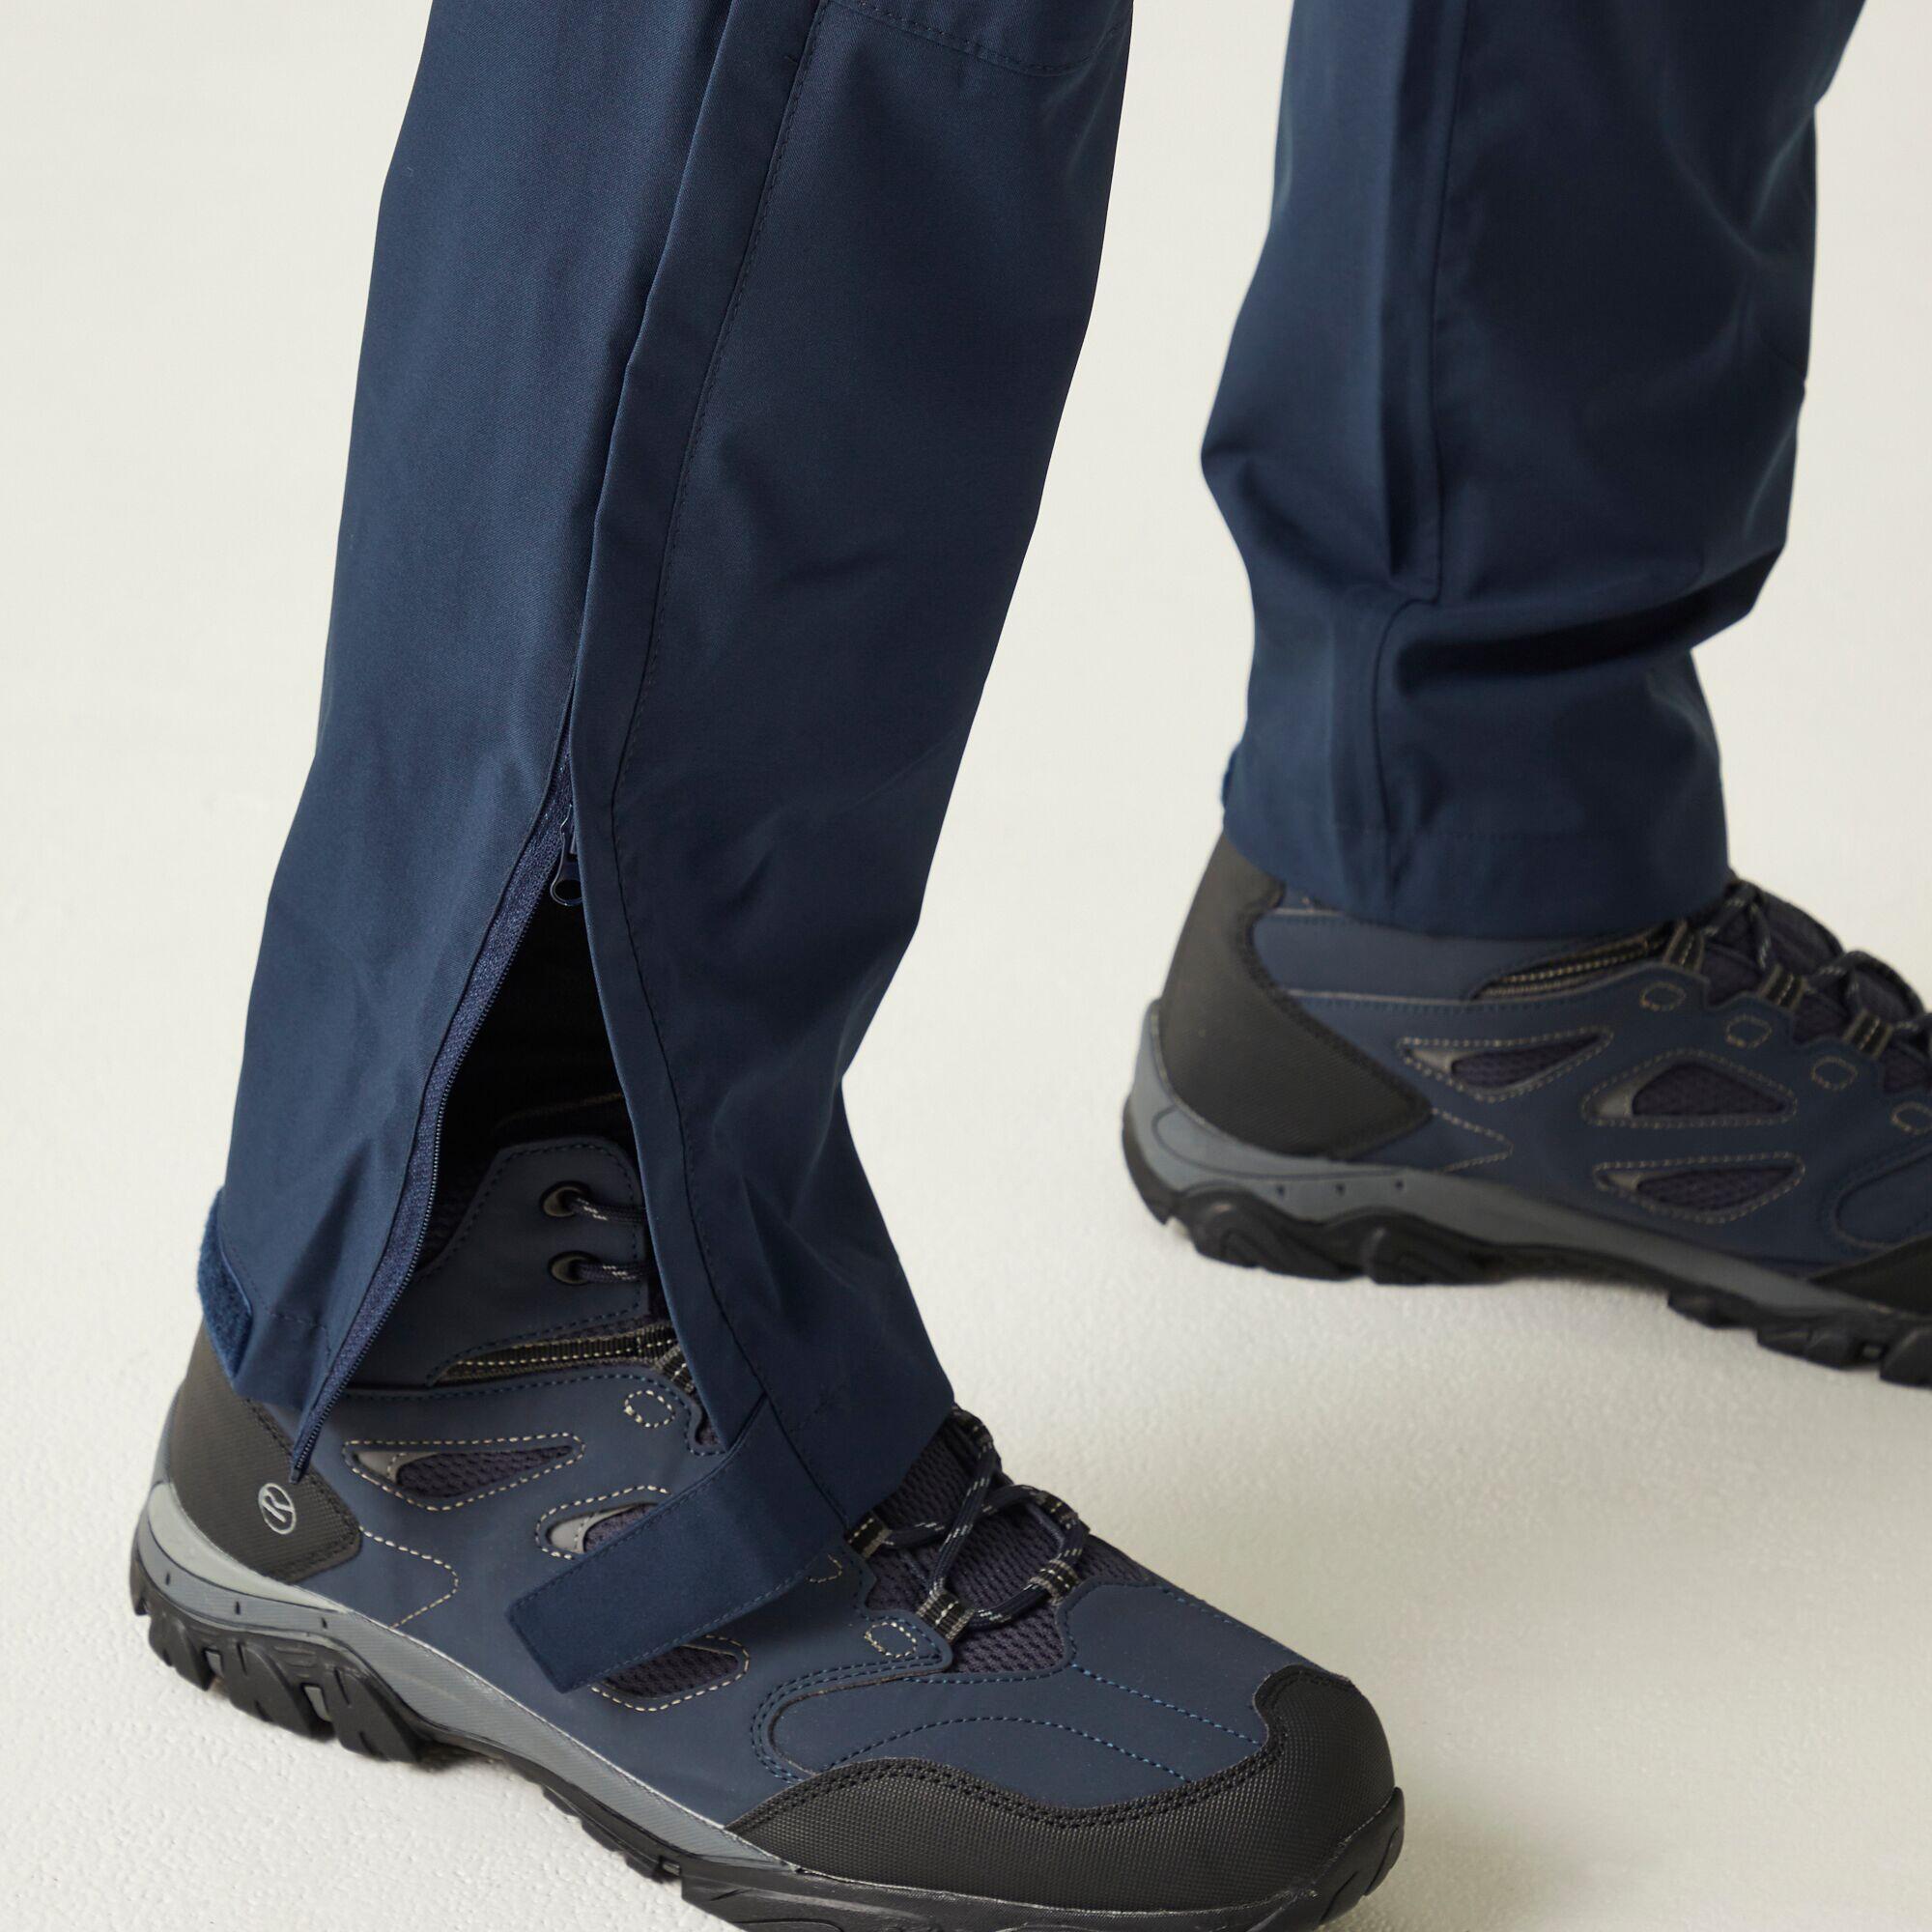 Highton Stretch Men's Hiking Overtrousers - Navy 4/6